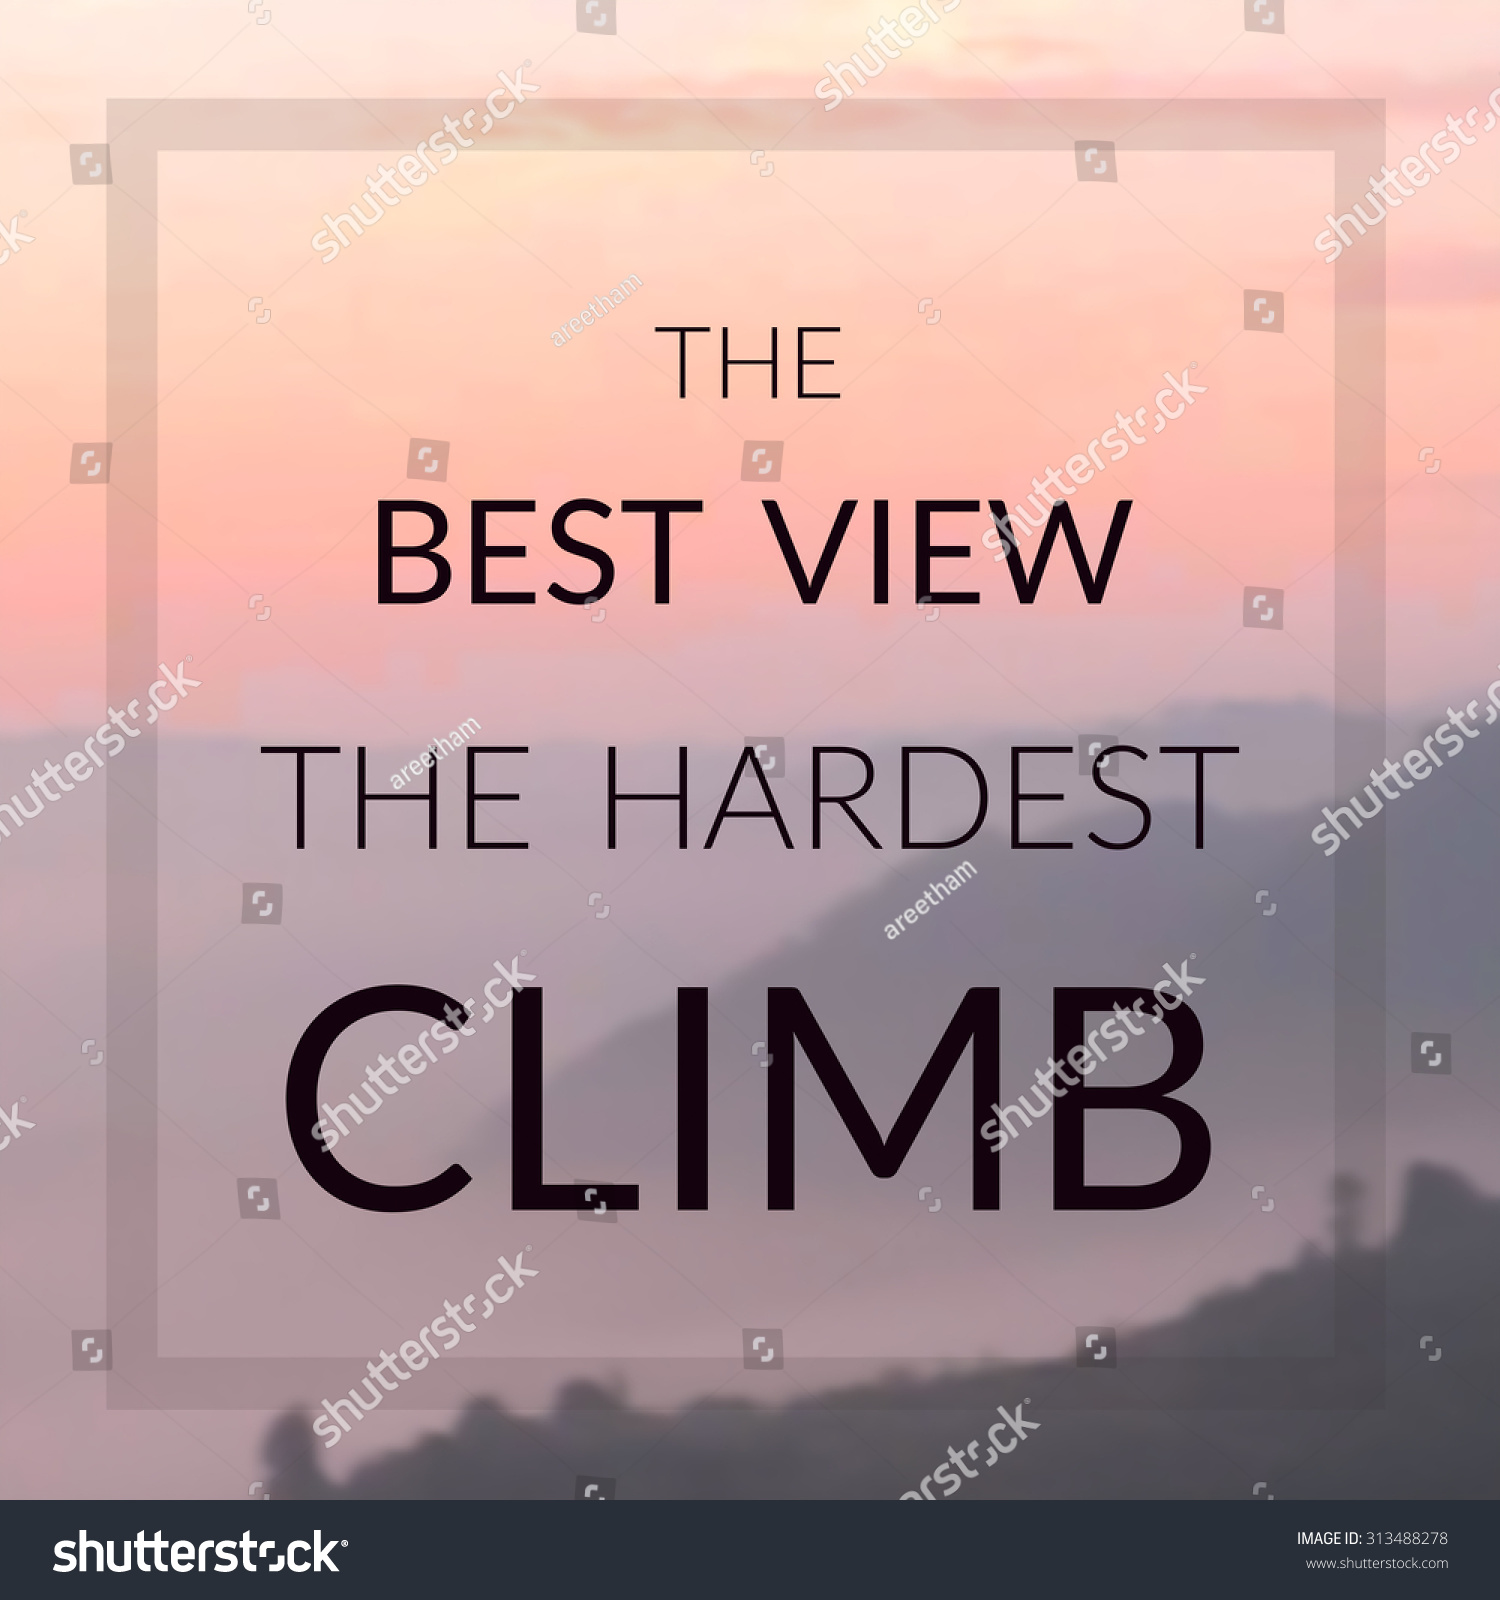 Inspirational quote on blurred  landscape background #313488278